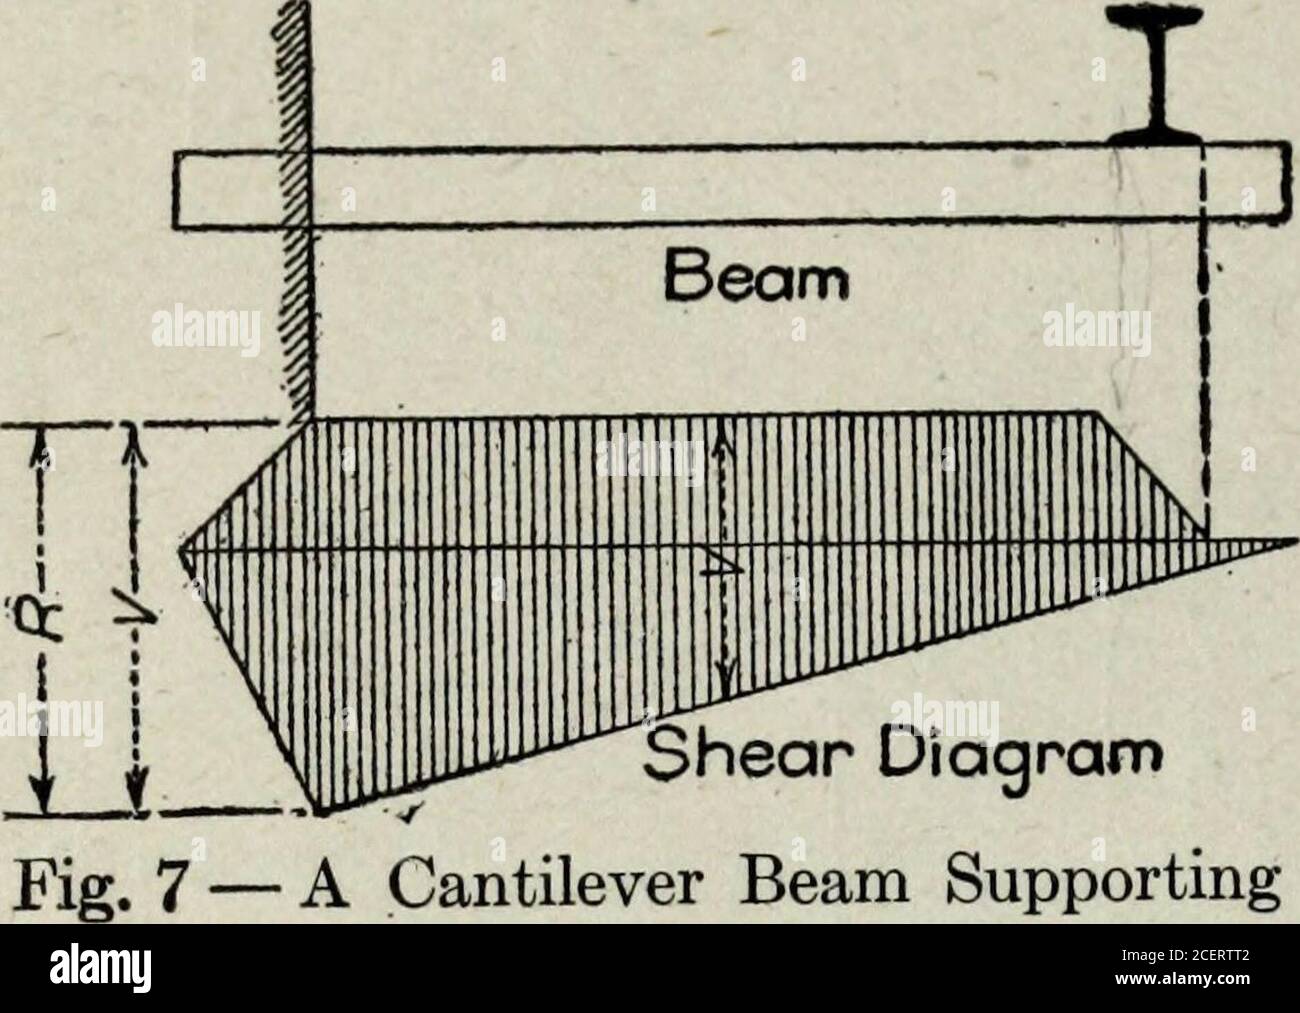 . Practical structural design; a text and reference work for engineers, architects, builders, draftsmen and technical schools;. (c) Shear Diagram Fig. G — A Cantilever Beam CarryingTwo Concentrated Loads by each support. Let us imagine the concentrated load to bestationary and the ends of the beam pushed up by the reactions.The reactions being equal to the load, there is no movement, butthe forces actually exist. Each reaction being one-half of P, then Ri = — and R2 = -^ This gives two cantilever beams with moments acting about 18 PRACTICAL STRUCTURAL DESIGN (around) the load, with a lever arm Stock Photo